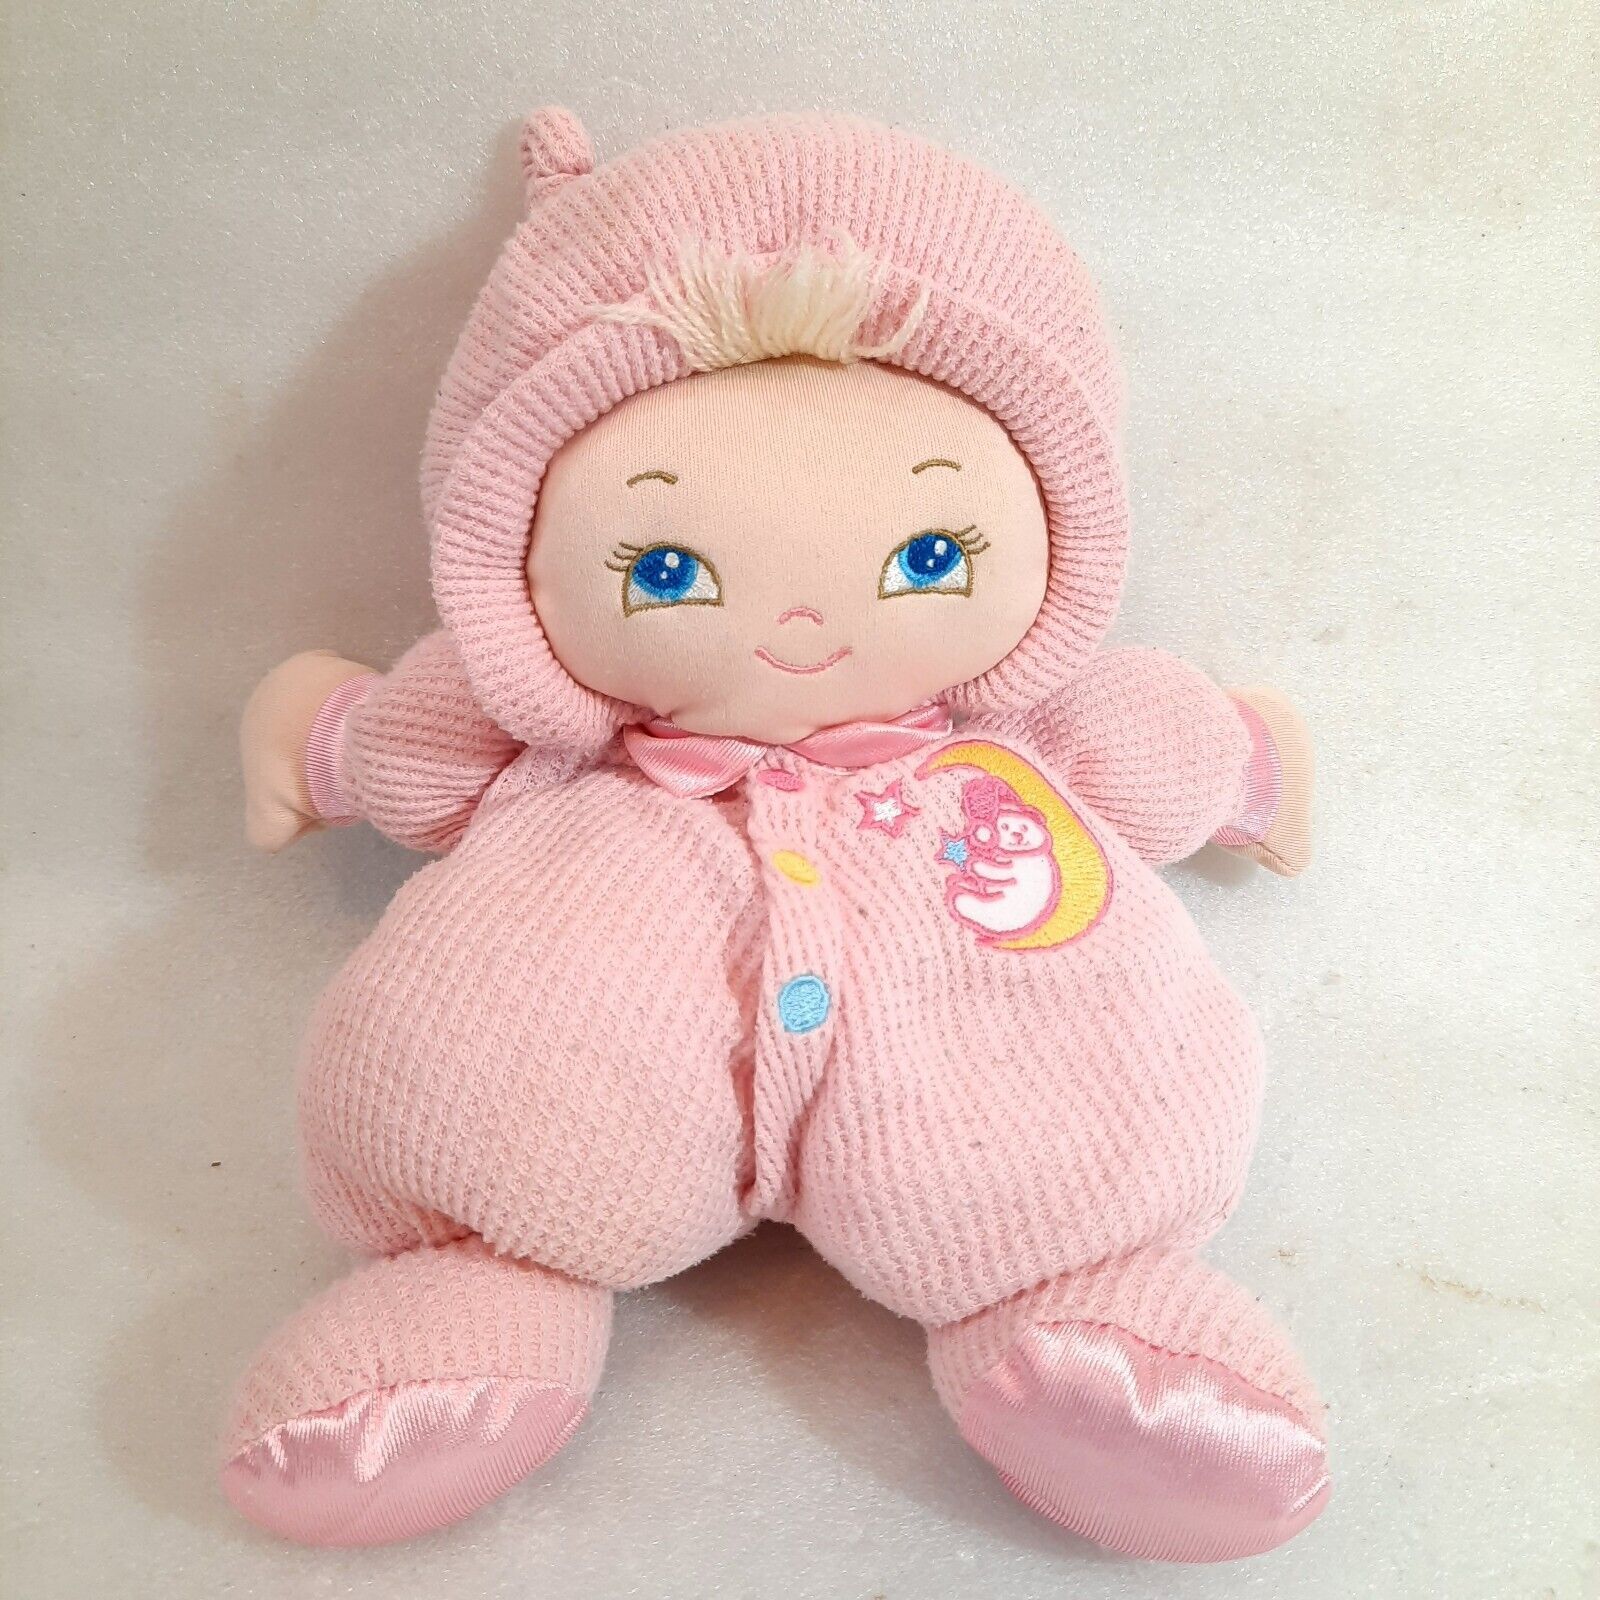 Goldberger Doll Baby’s first Bundle of Joy plush Waffle weave baby Pink thermal - $65.00